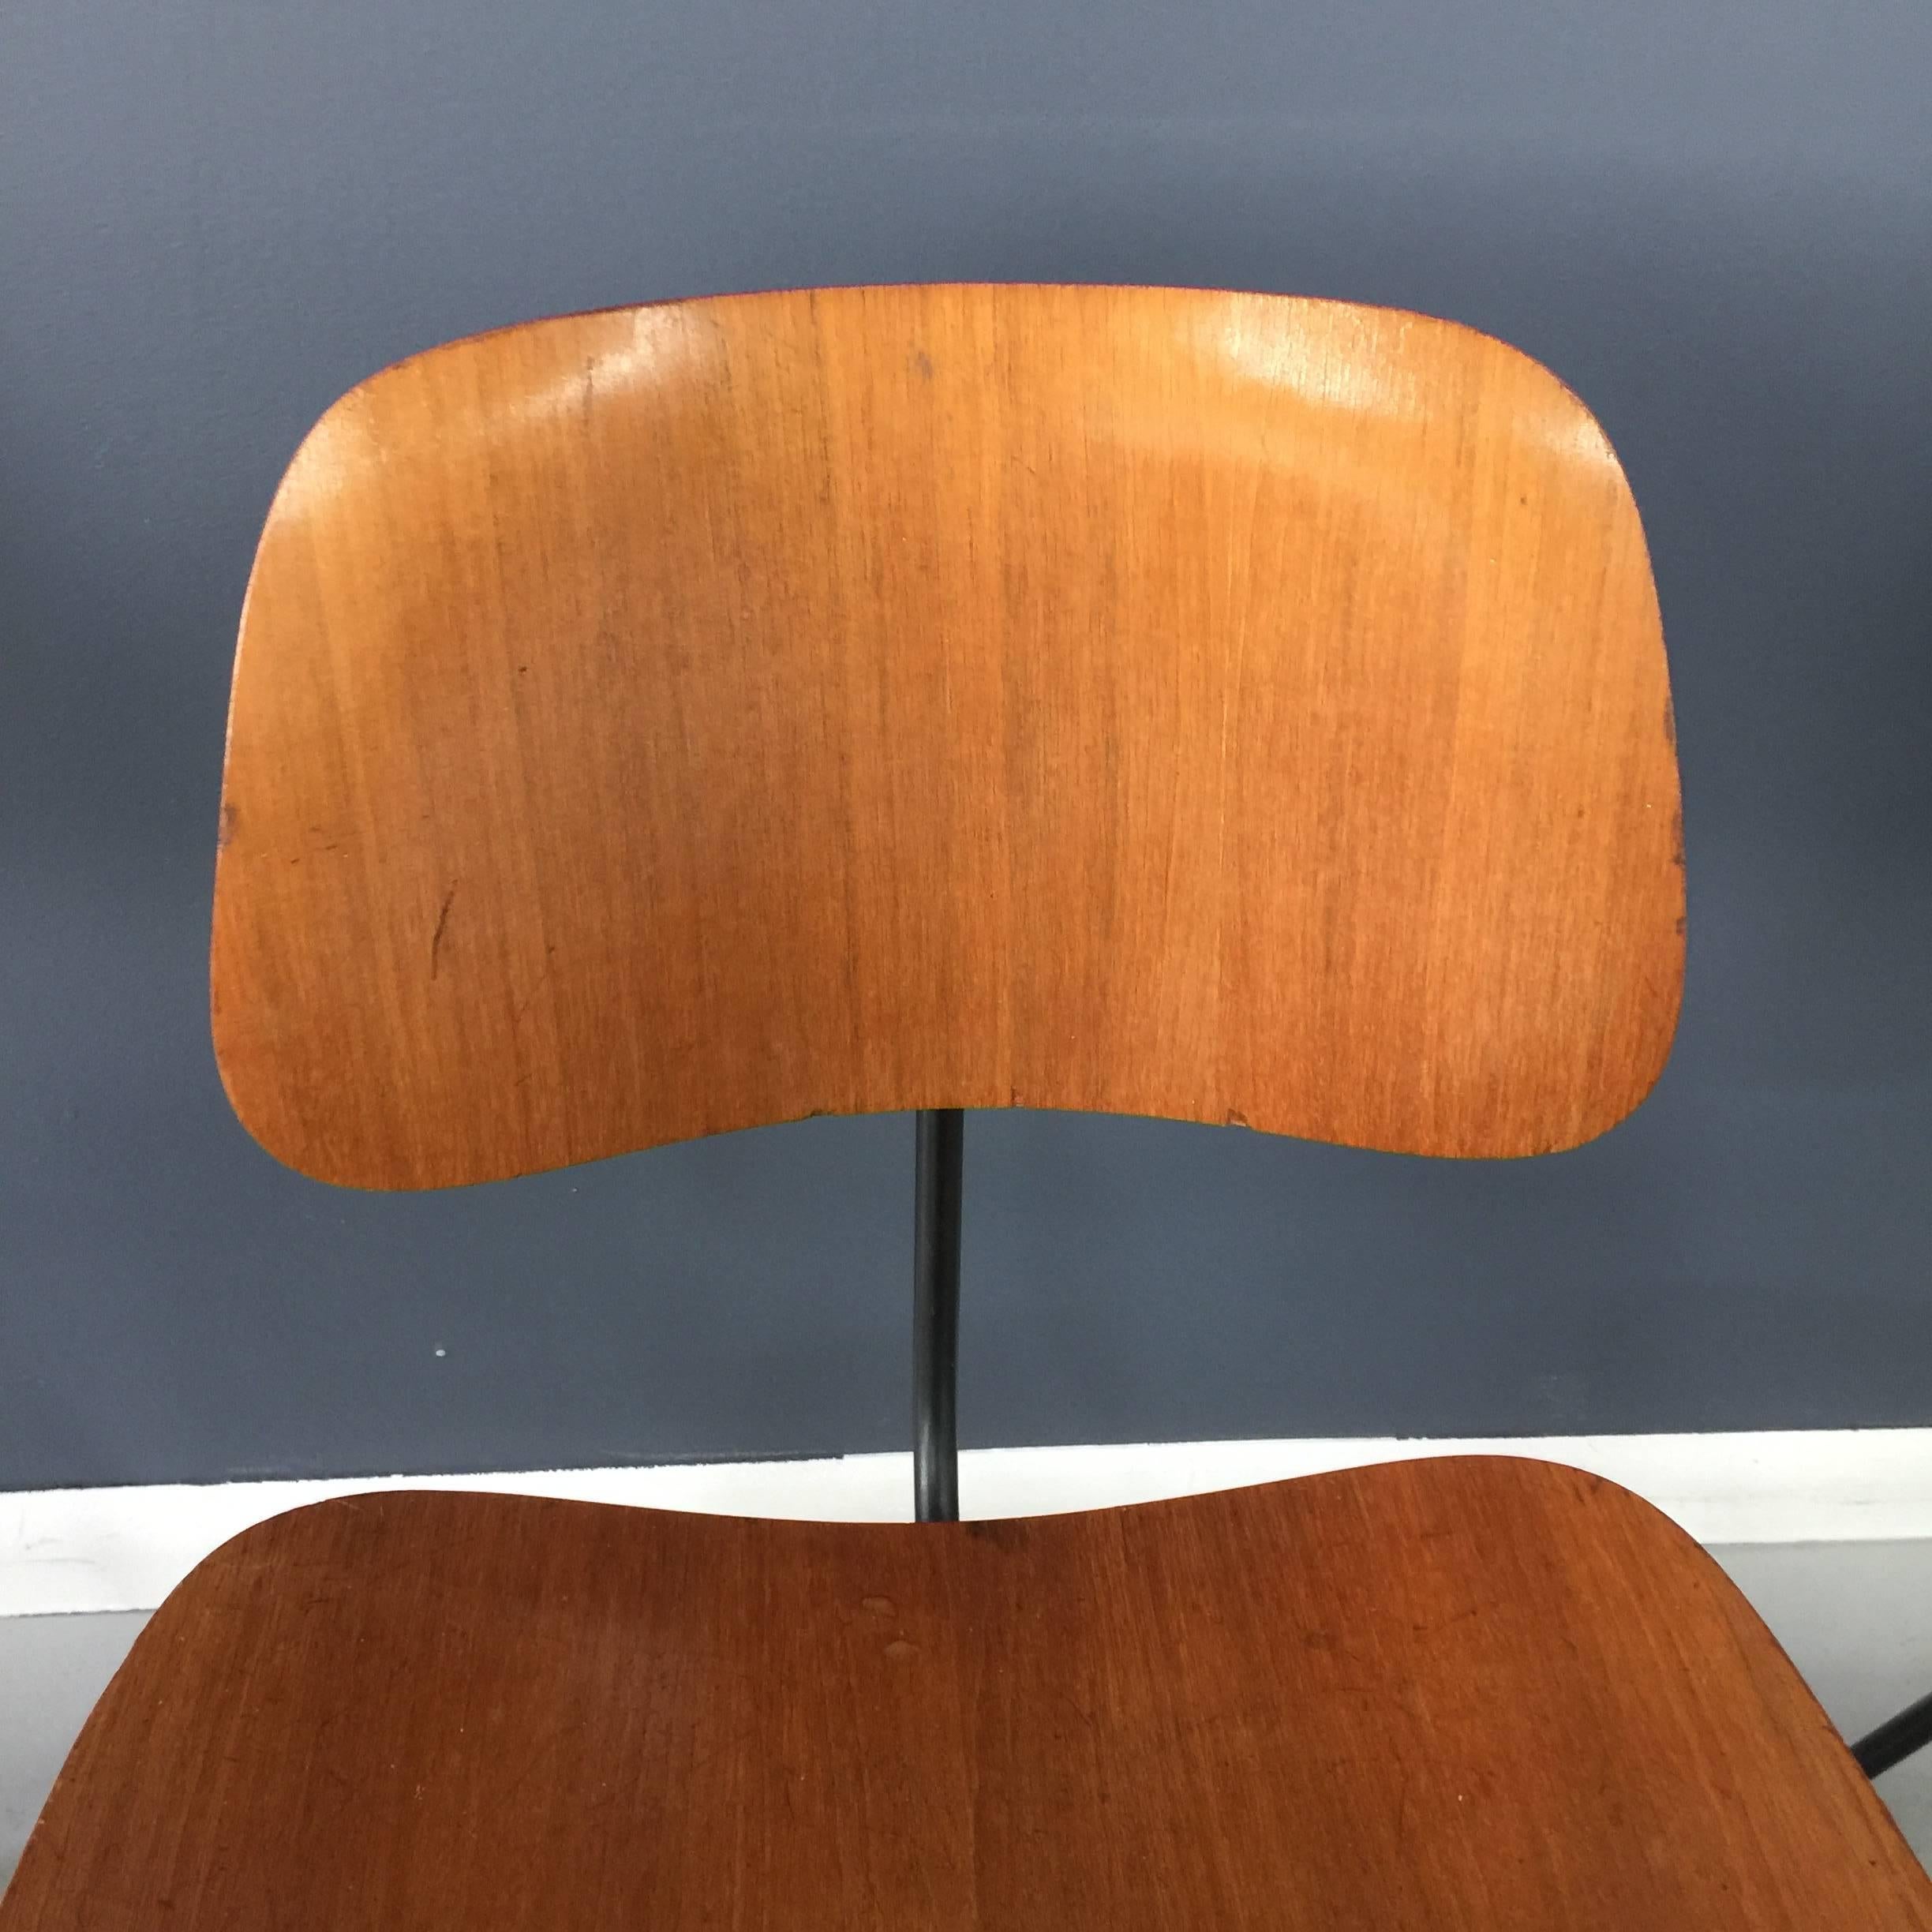 Set of six early (late 1950s-early 1960s) Eames DCM chairs. Some retain their original label. All sturdy and intact. Condition ranges from excellent to scratched (see photos for best and worst chairs). One has oxidation on the leg.